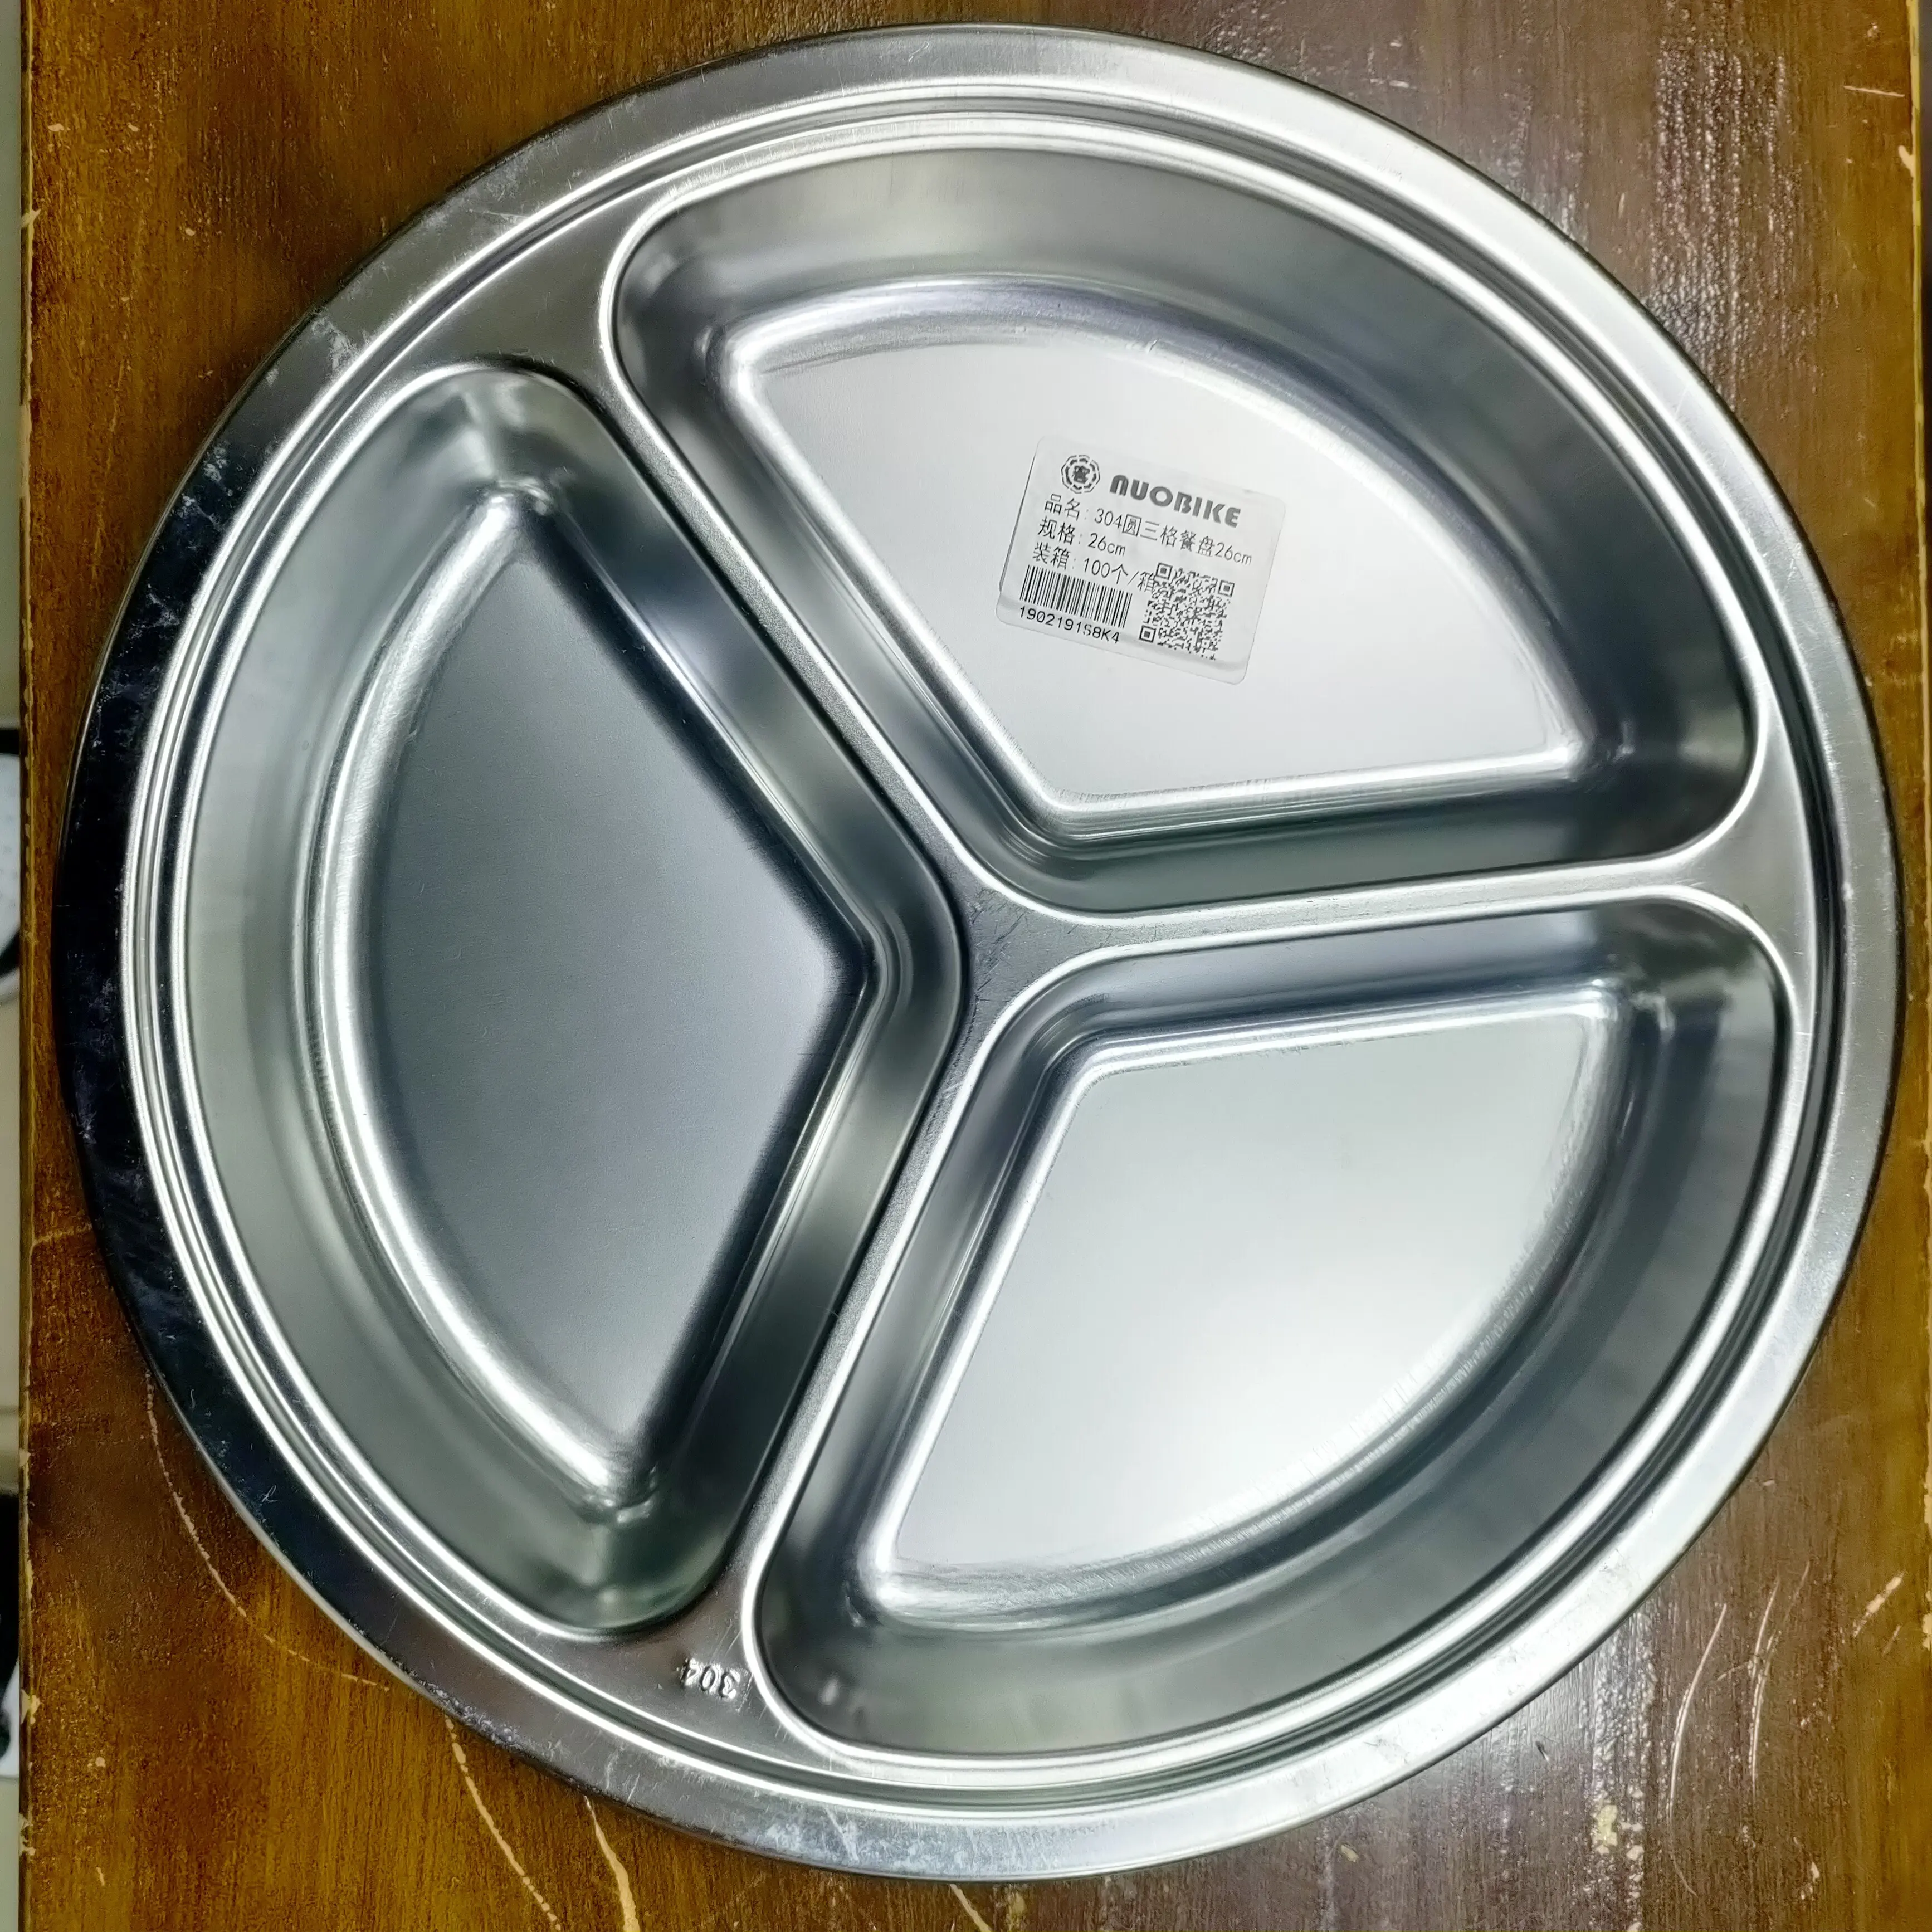 Food Tray 304 Stainless Steel Metal for School Walmart Wholesale Hot Modern Brown Box Hot Round Plate Dish Dinner Plate